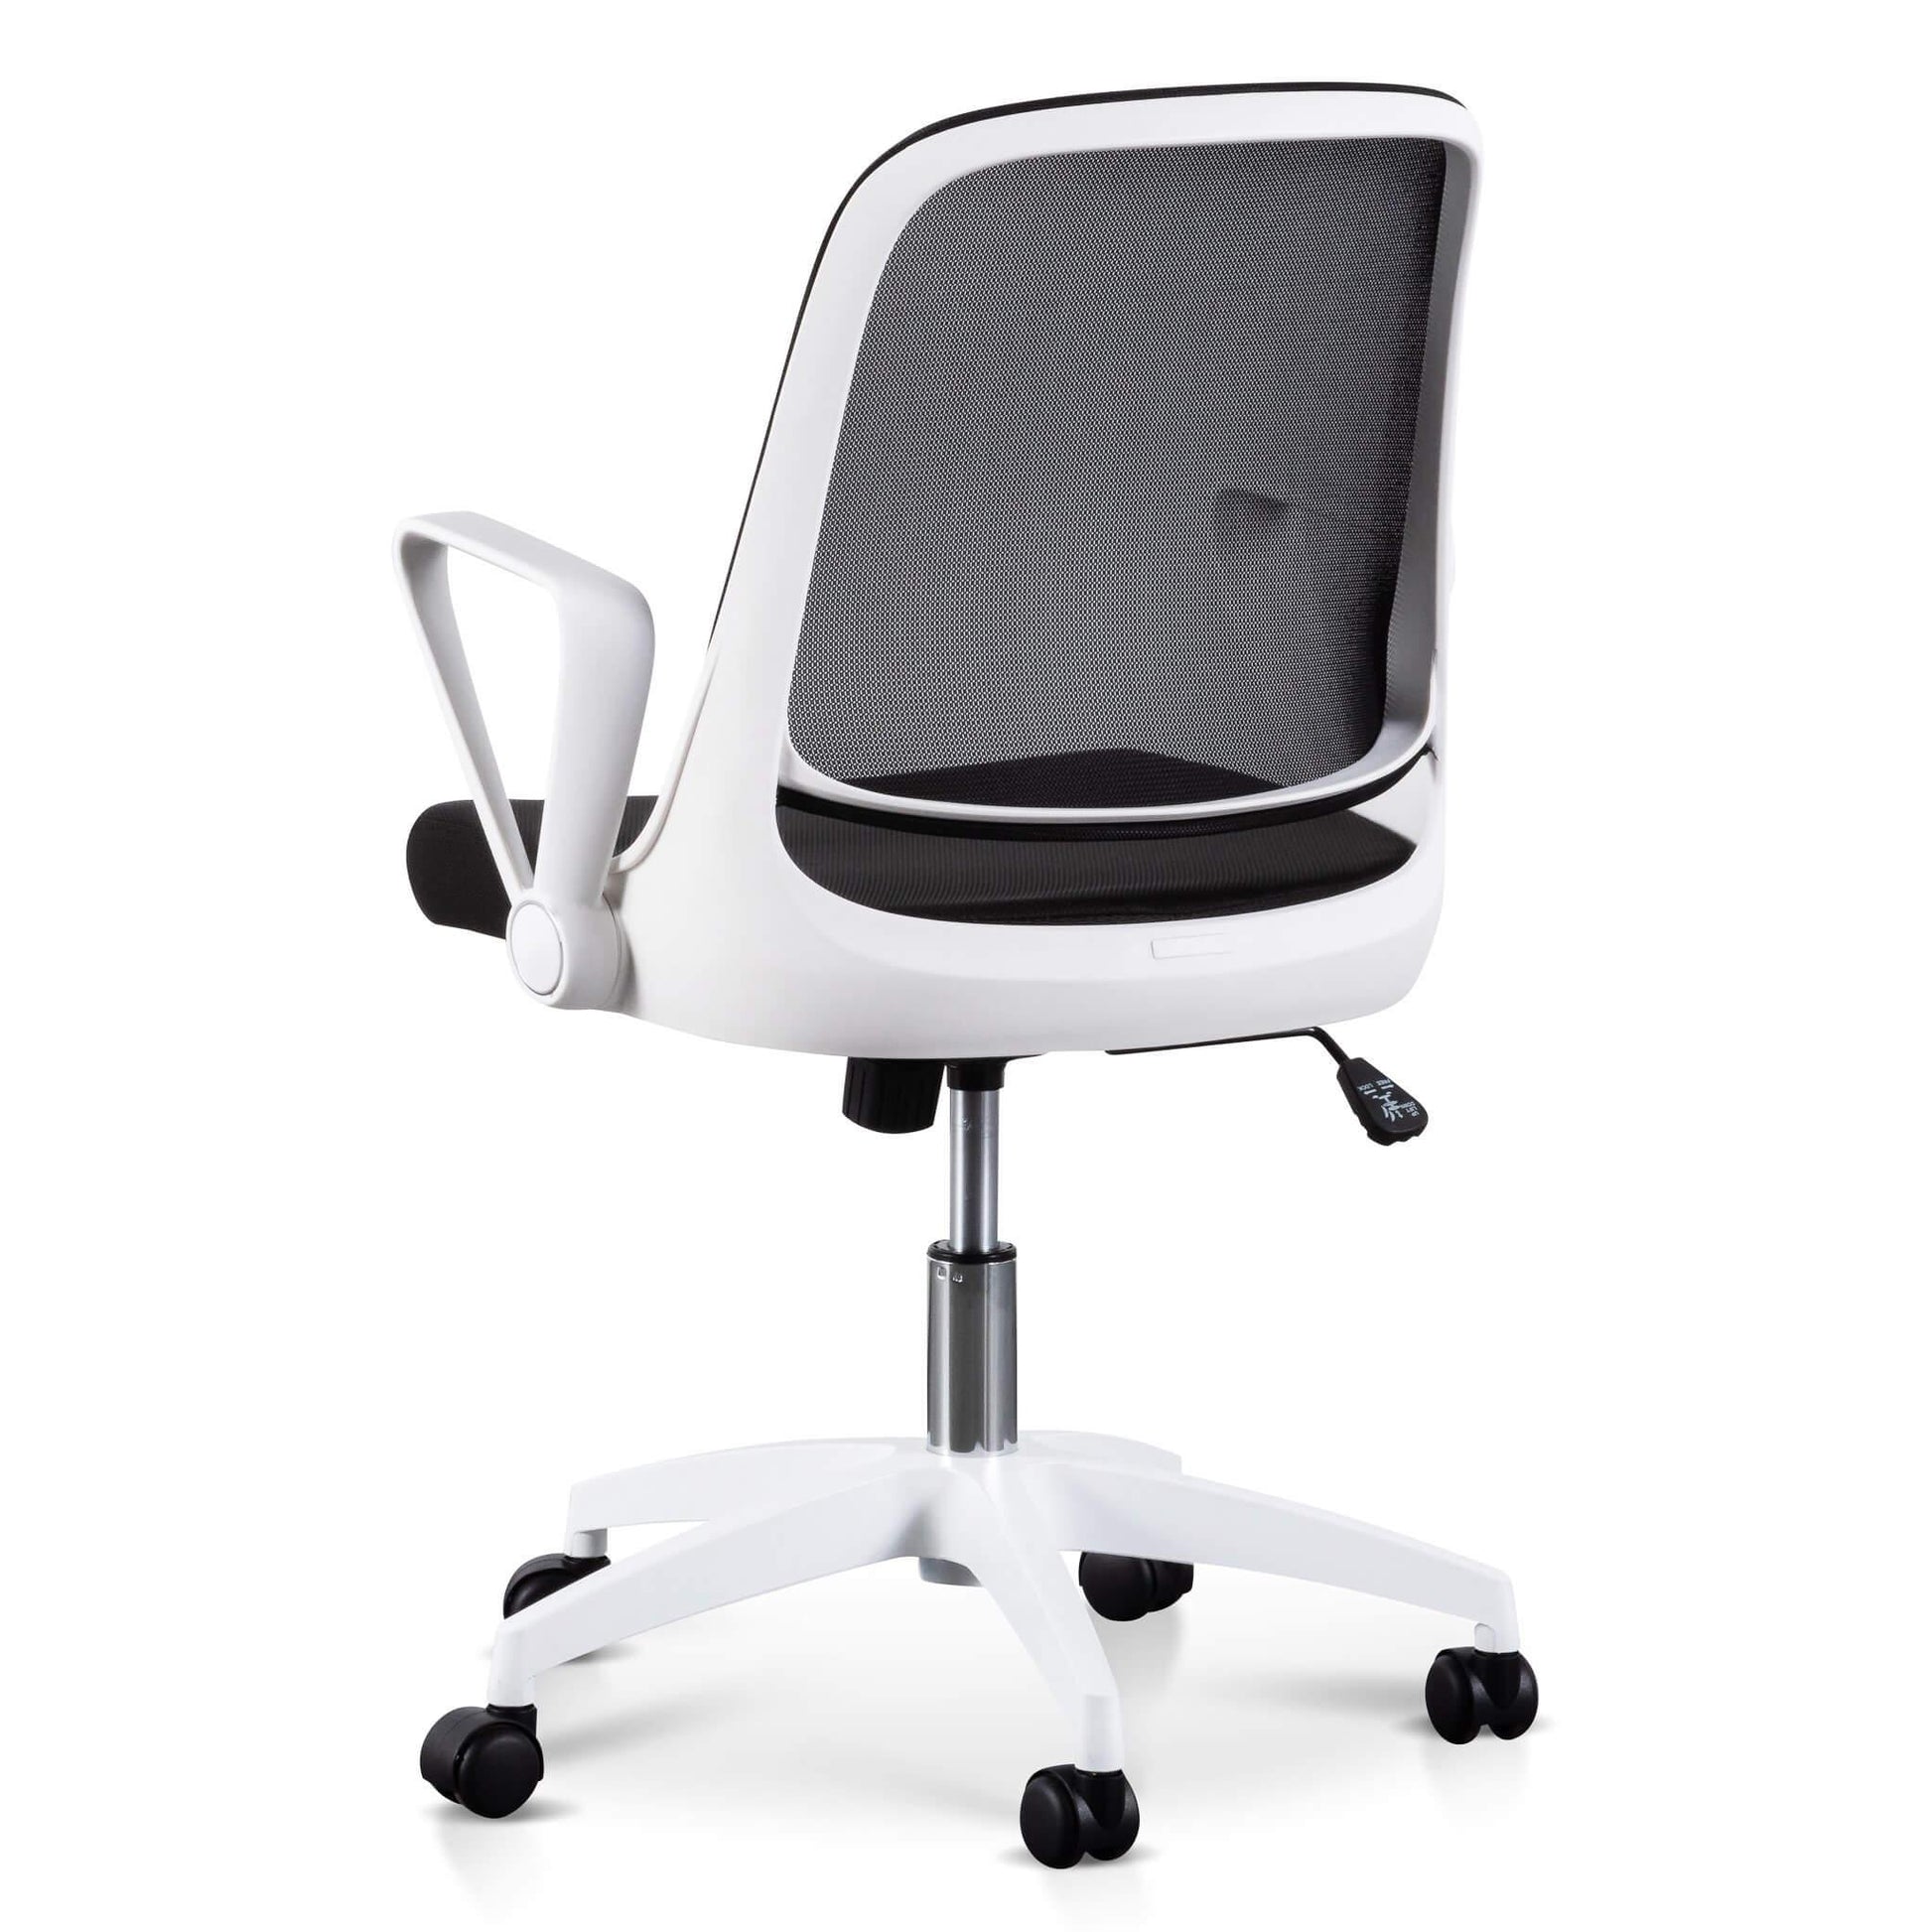 Calibre Black Office Chair - White Arm and Base OC6190-LF - Office/Gaming ChairsOC6190-LF 2